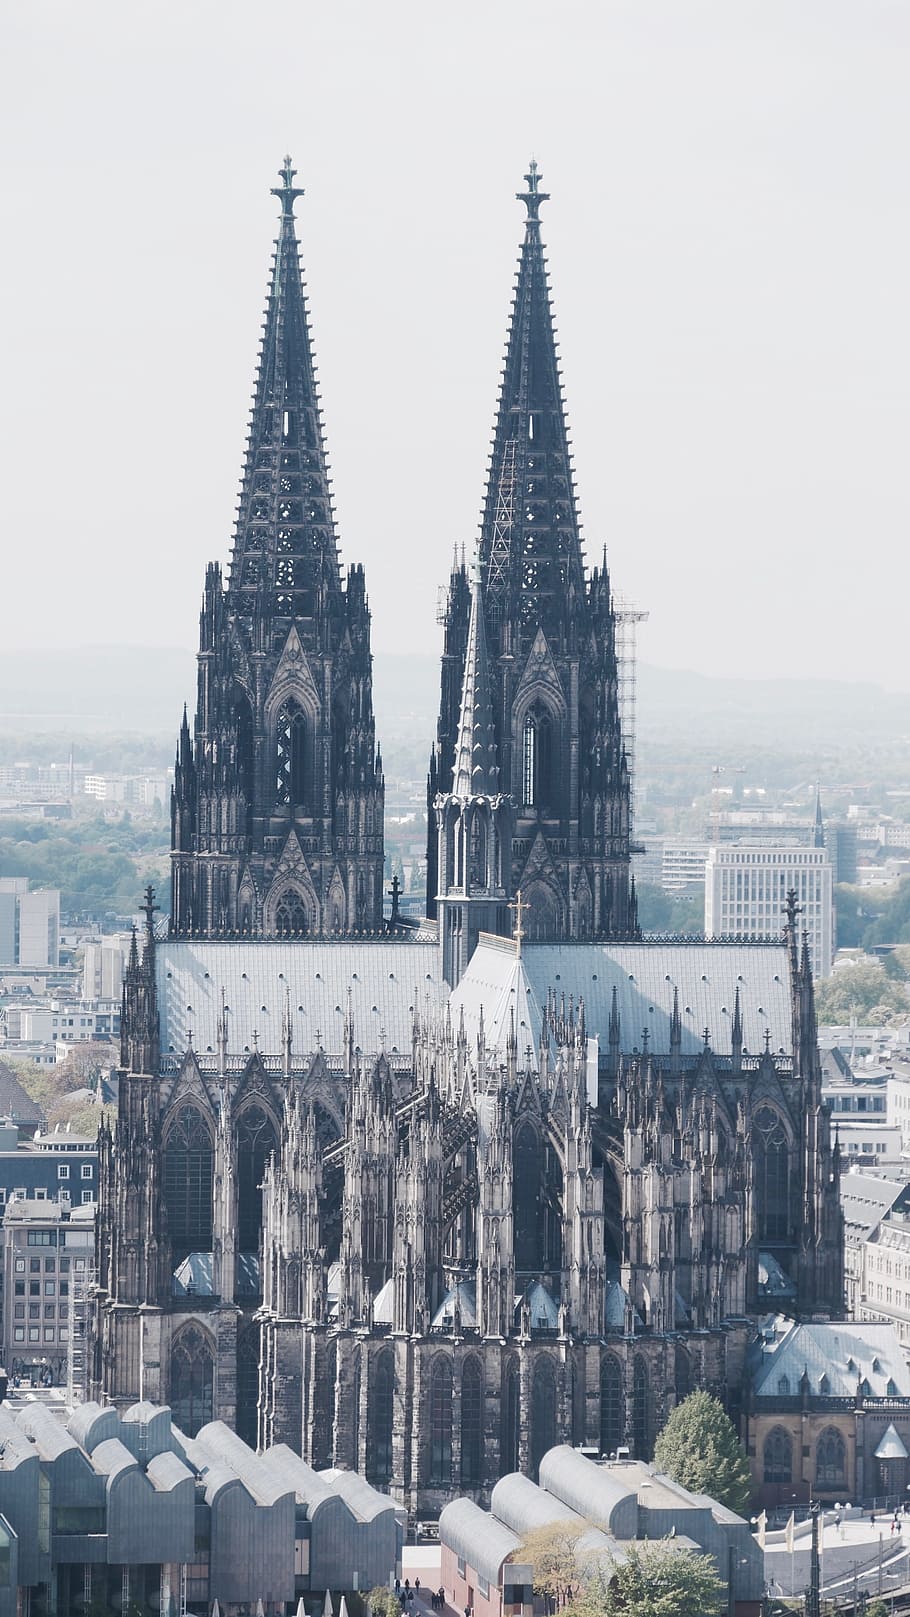 Dom, Cologne Cathedral, Cathedral, Church, cologne, church, sky, landmark, germany, architecture, cathedral